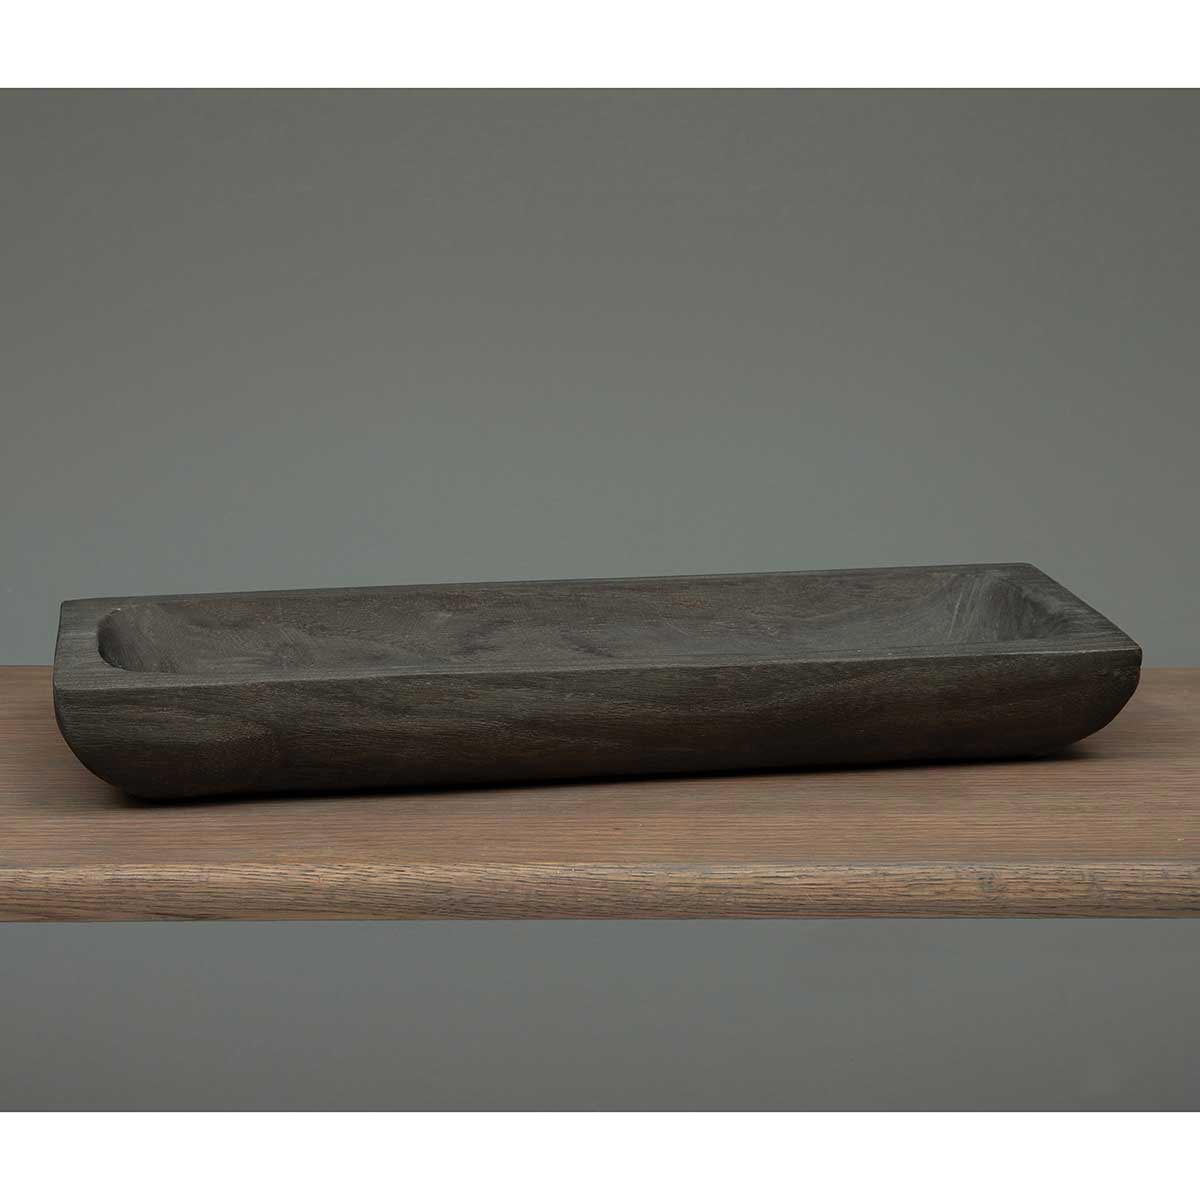 WOOD CURVED RECTANGLE TRAY BLACK 18.75"X5.75"X2.5" - Click Image to Close